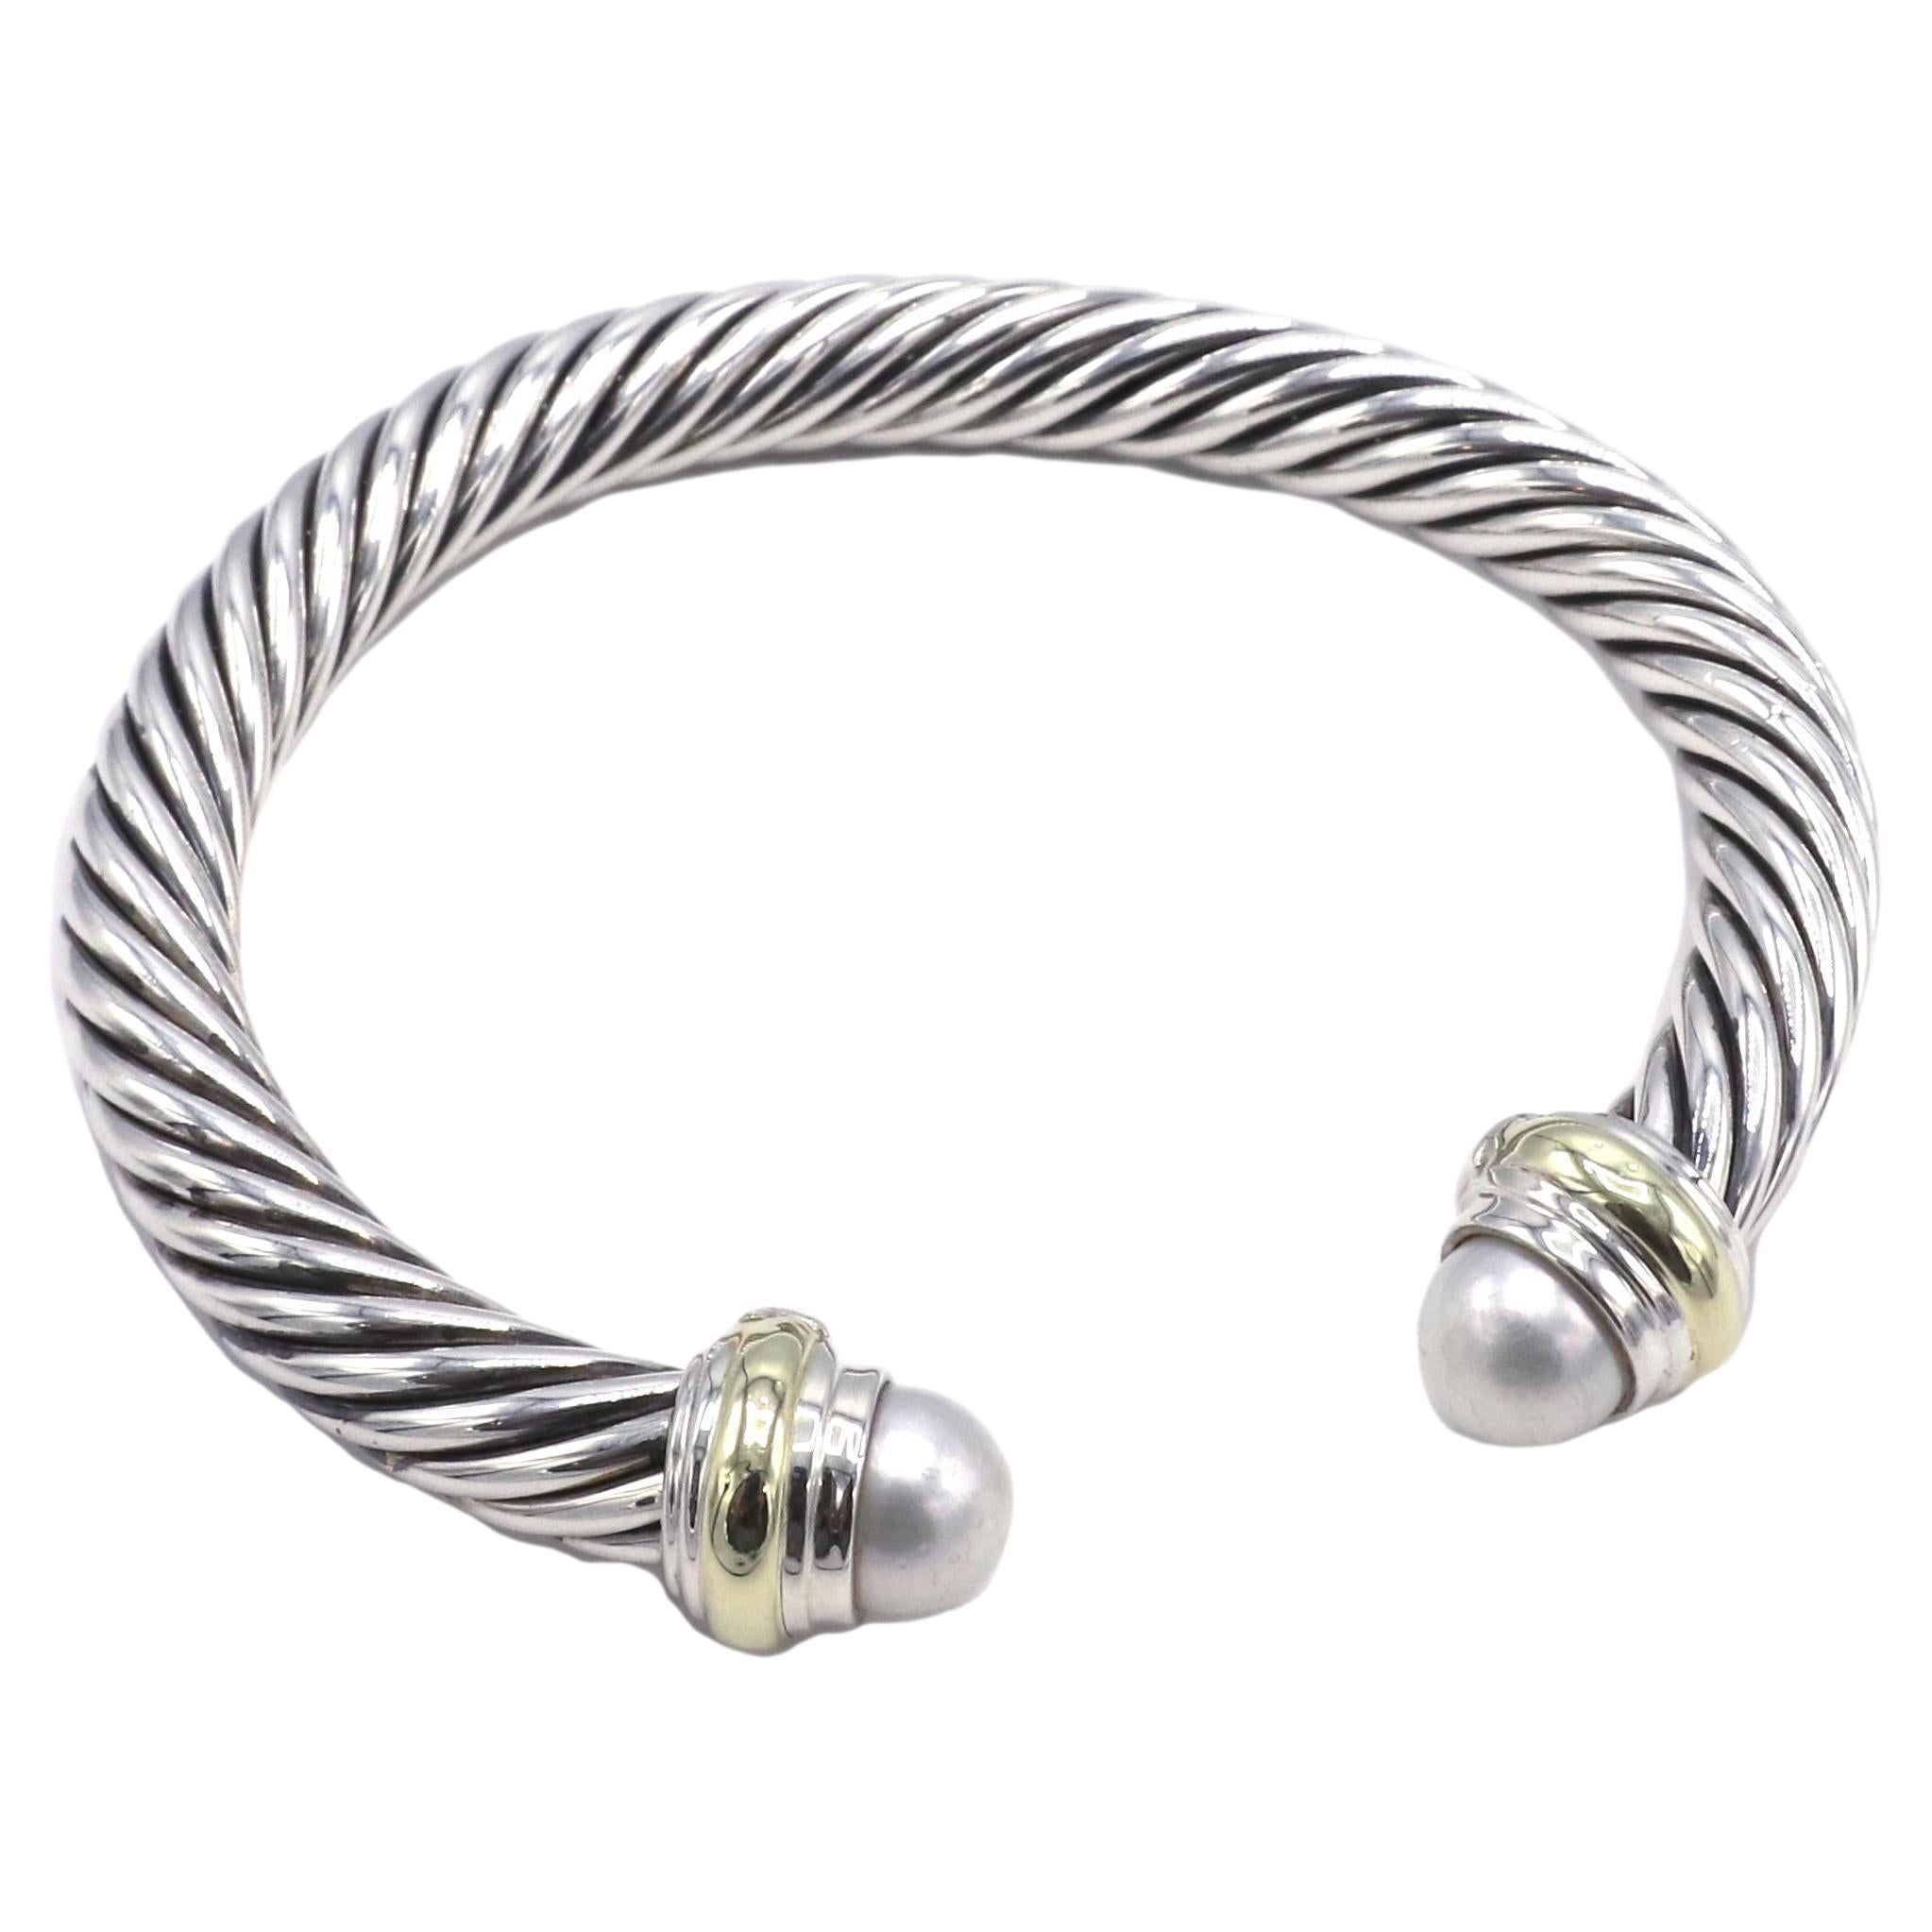 David Yurman Cable Classic Collection Bracelet with Pearls and 14k Yellow Gold